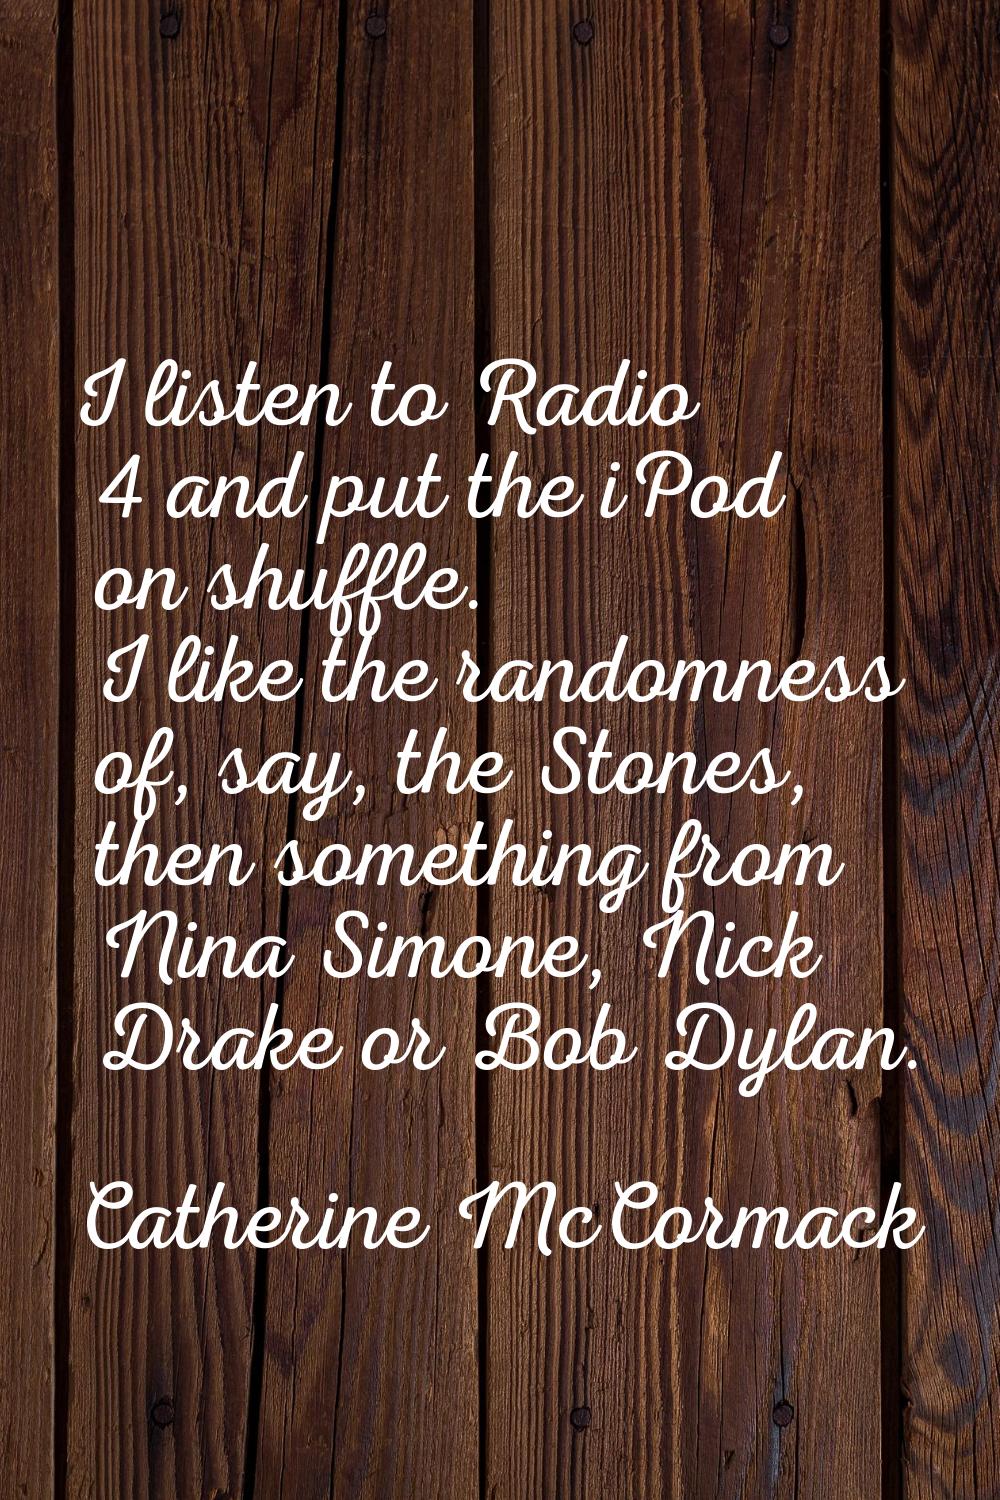 I listen to Radio 4 and put the iPod on shuffle. I like the randomness of, say, the Stones, then so